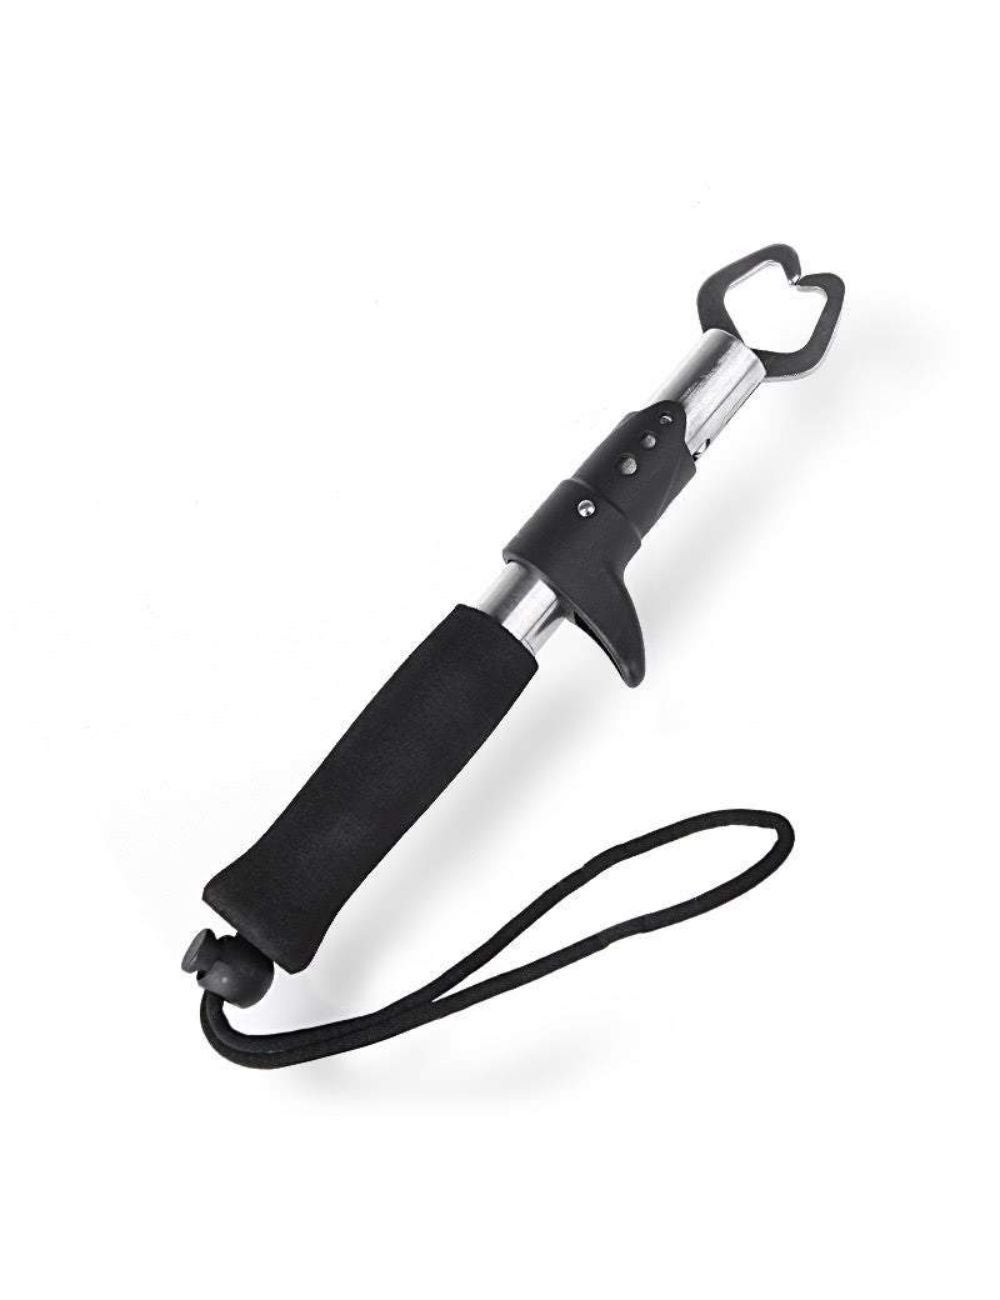 Portable Fishing Gripper Fish, Fish Gripper Stainless Steel